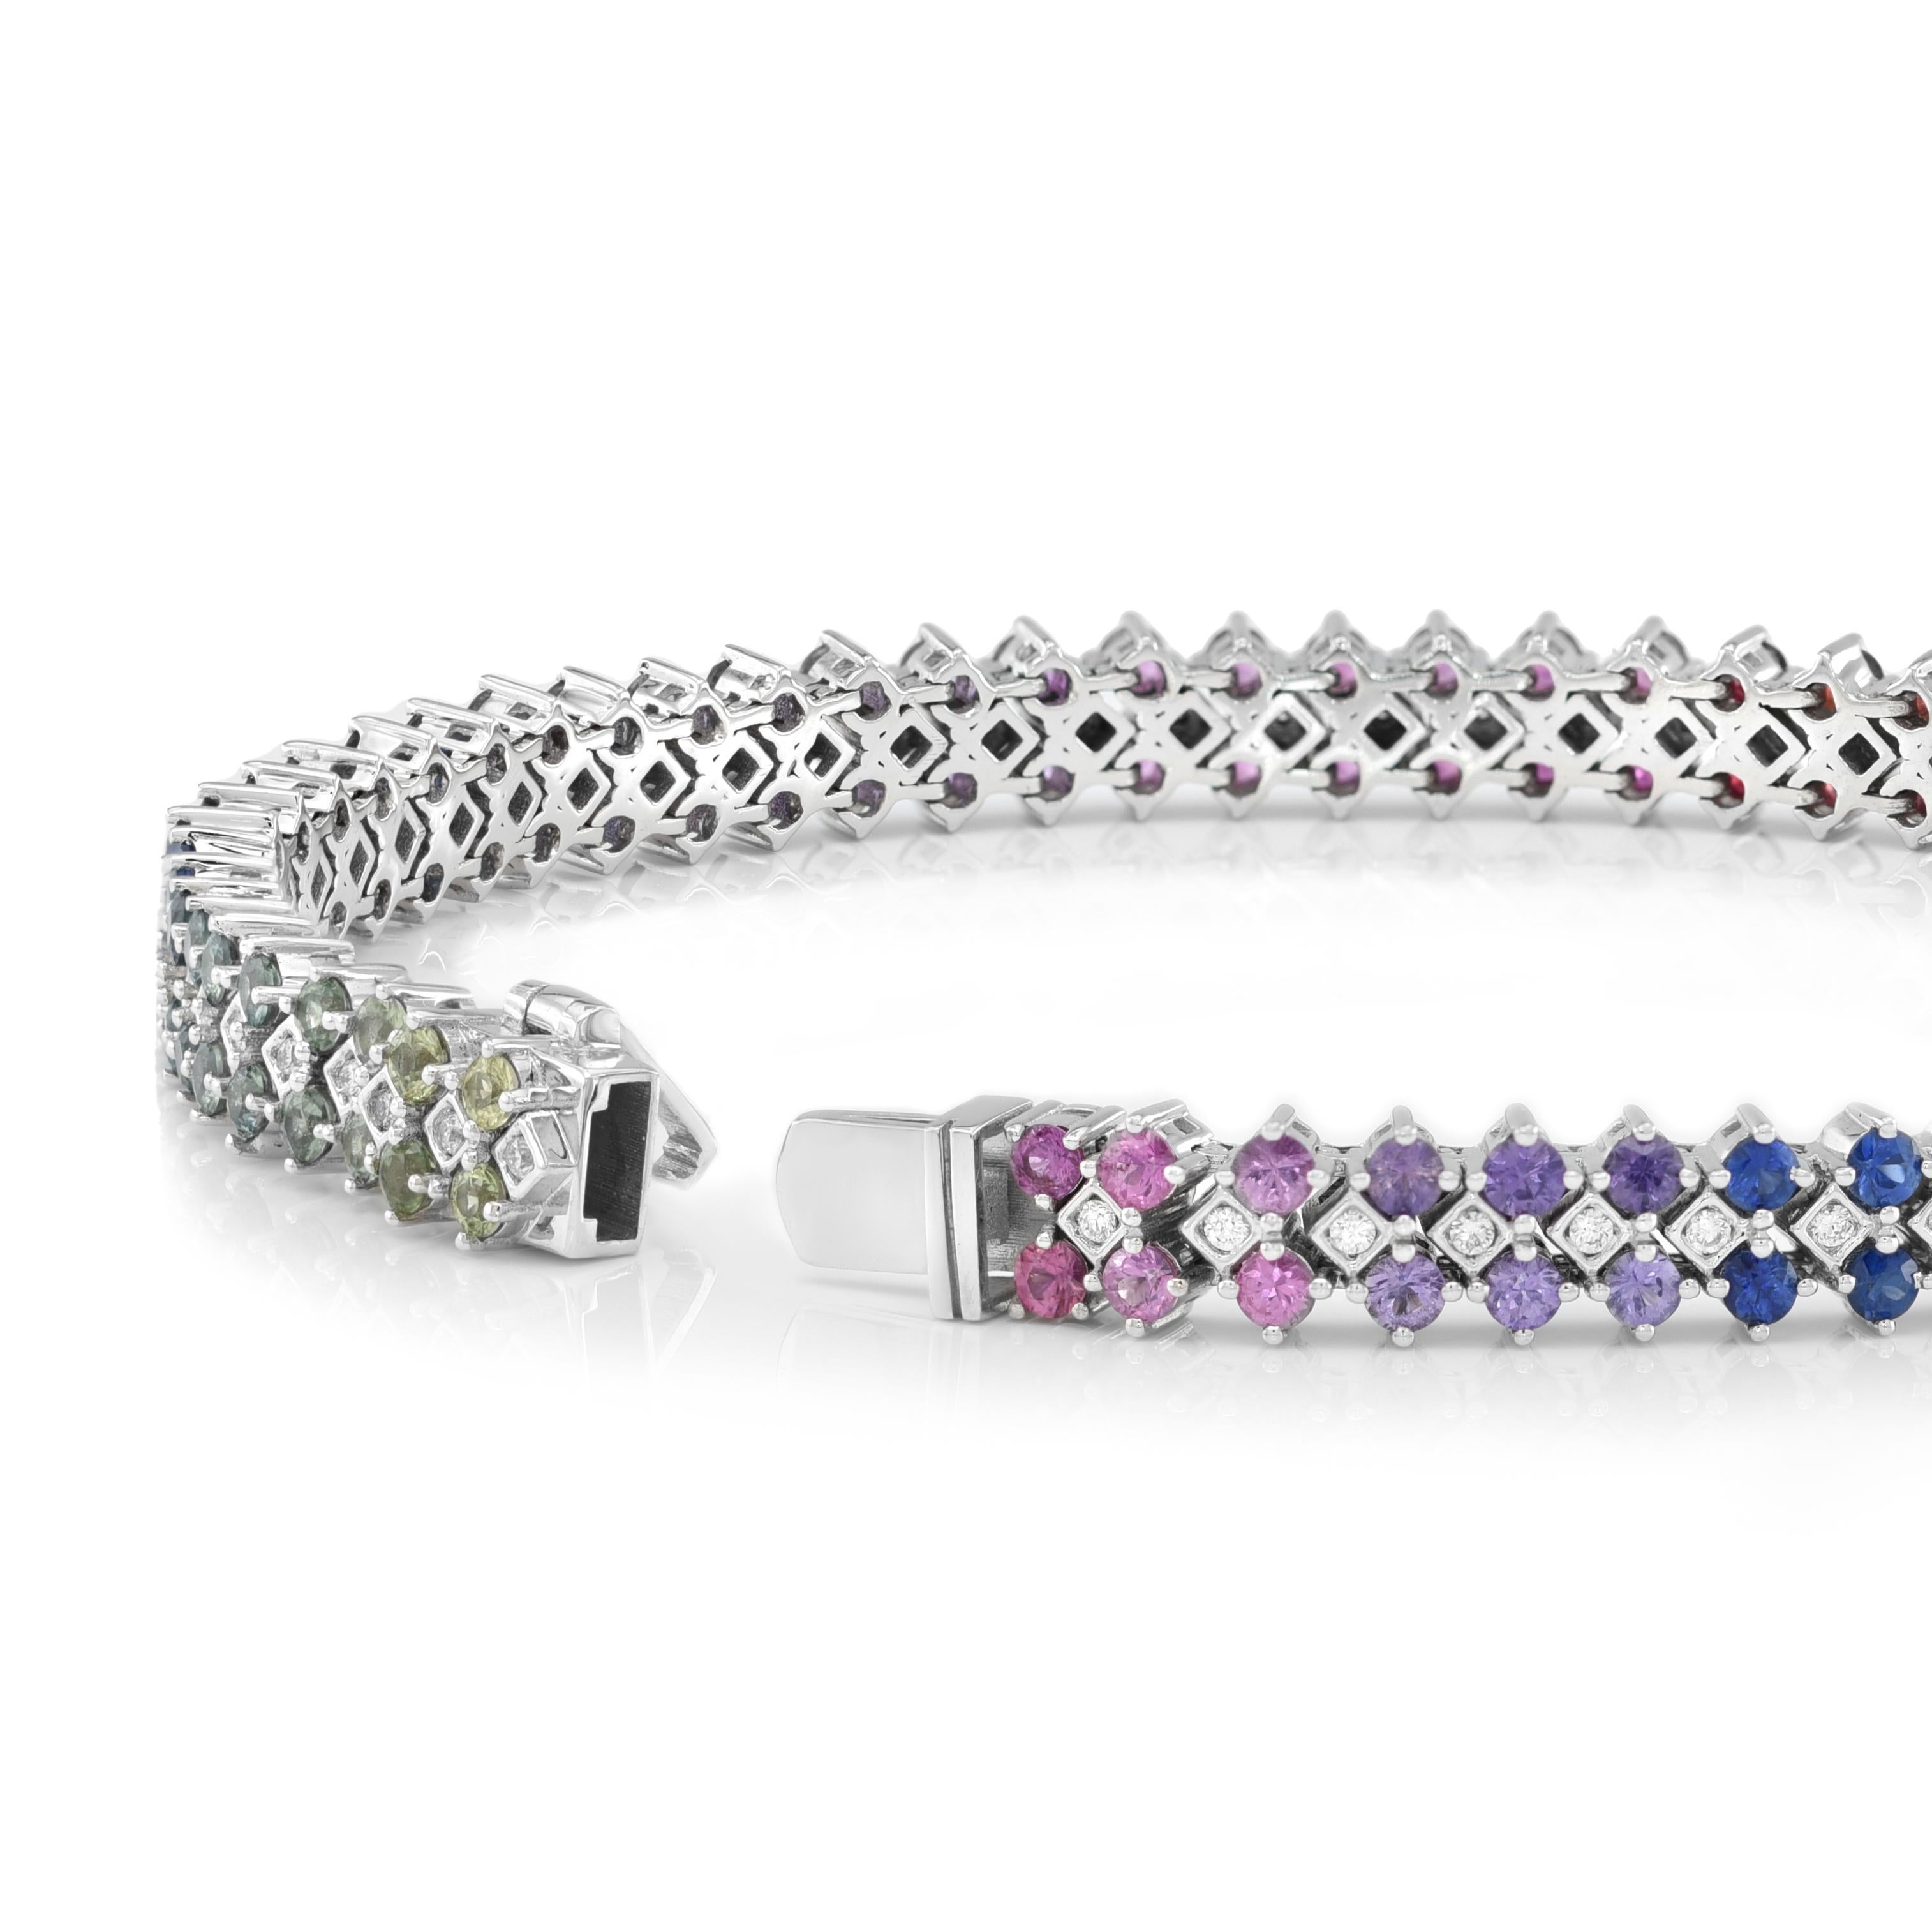 Elevate your style with a masterpiece: 4.60 carats Natural Rainbow Multi Color Sapphires and 0.33 carats Diamonds ensemble, elegantly set in an 18K White Gold Bracelet measuring 7 inches in length. The brilliance of Sri Lanka's Brilliant cut